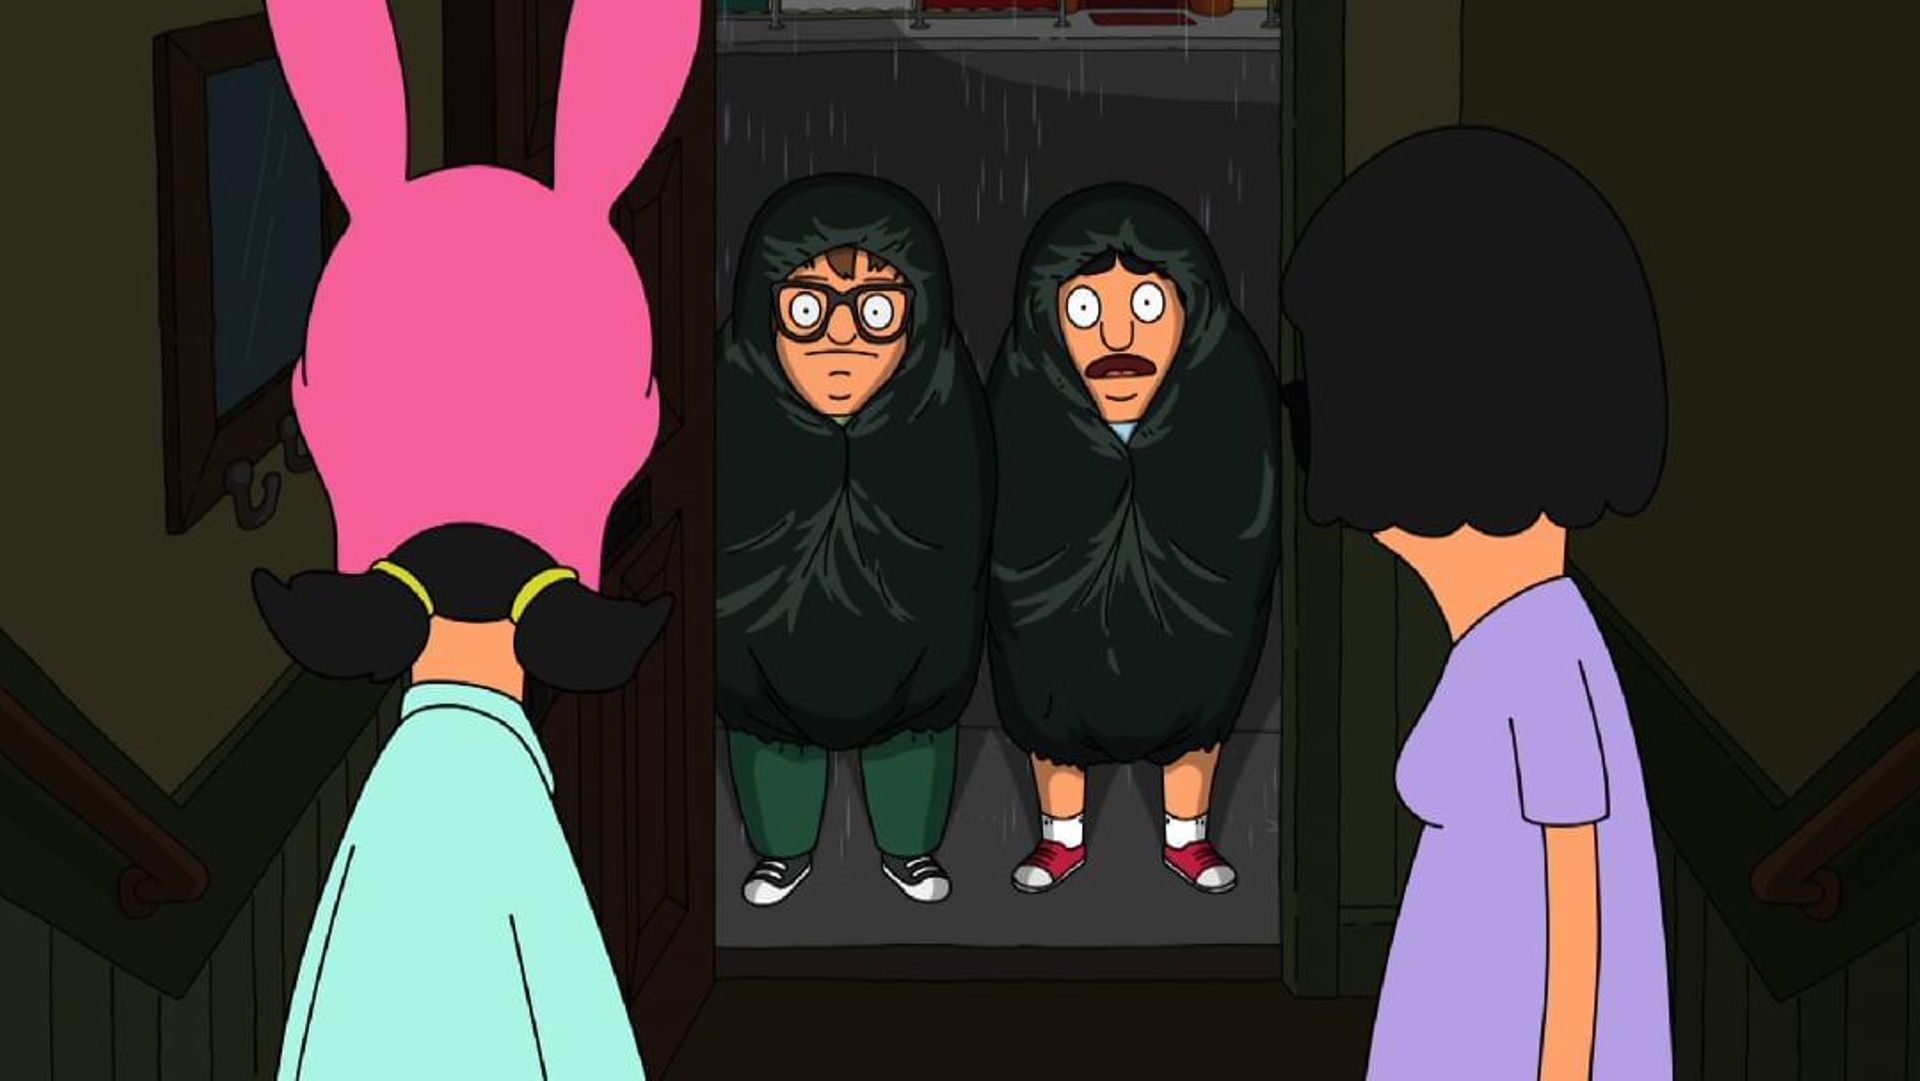 YARN, Did you mean to leave a gaping hole in the ceiling?, Bob's Burgers  - S08E13 Cheer Up Sleepy Gene, Video gifs by quotes, ae1ba77a